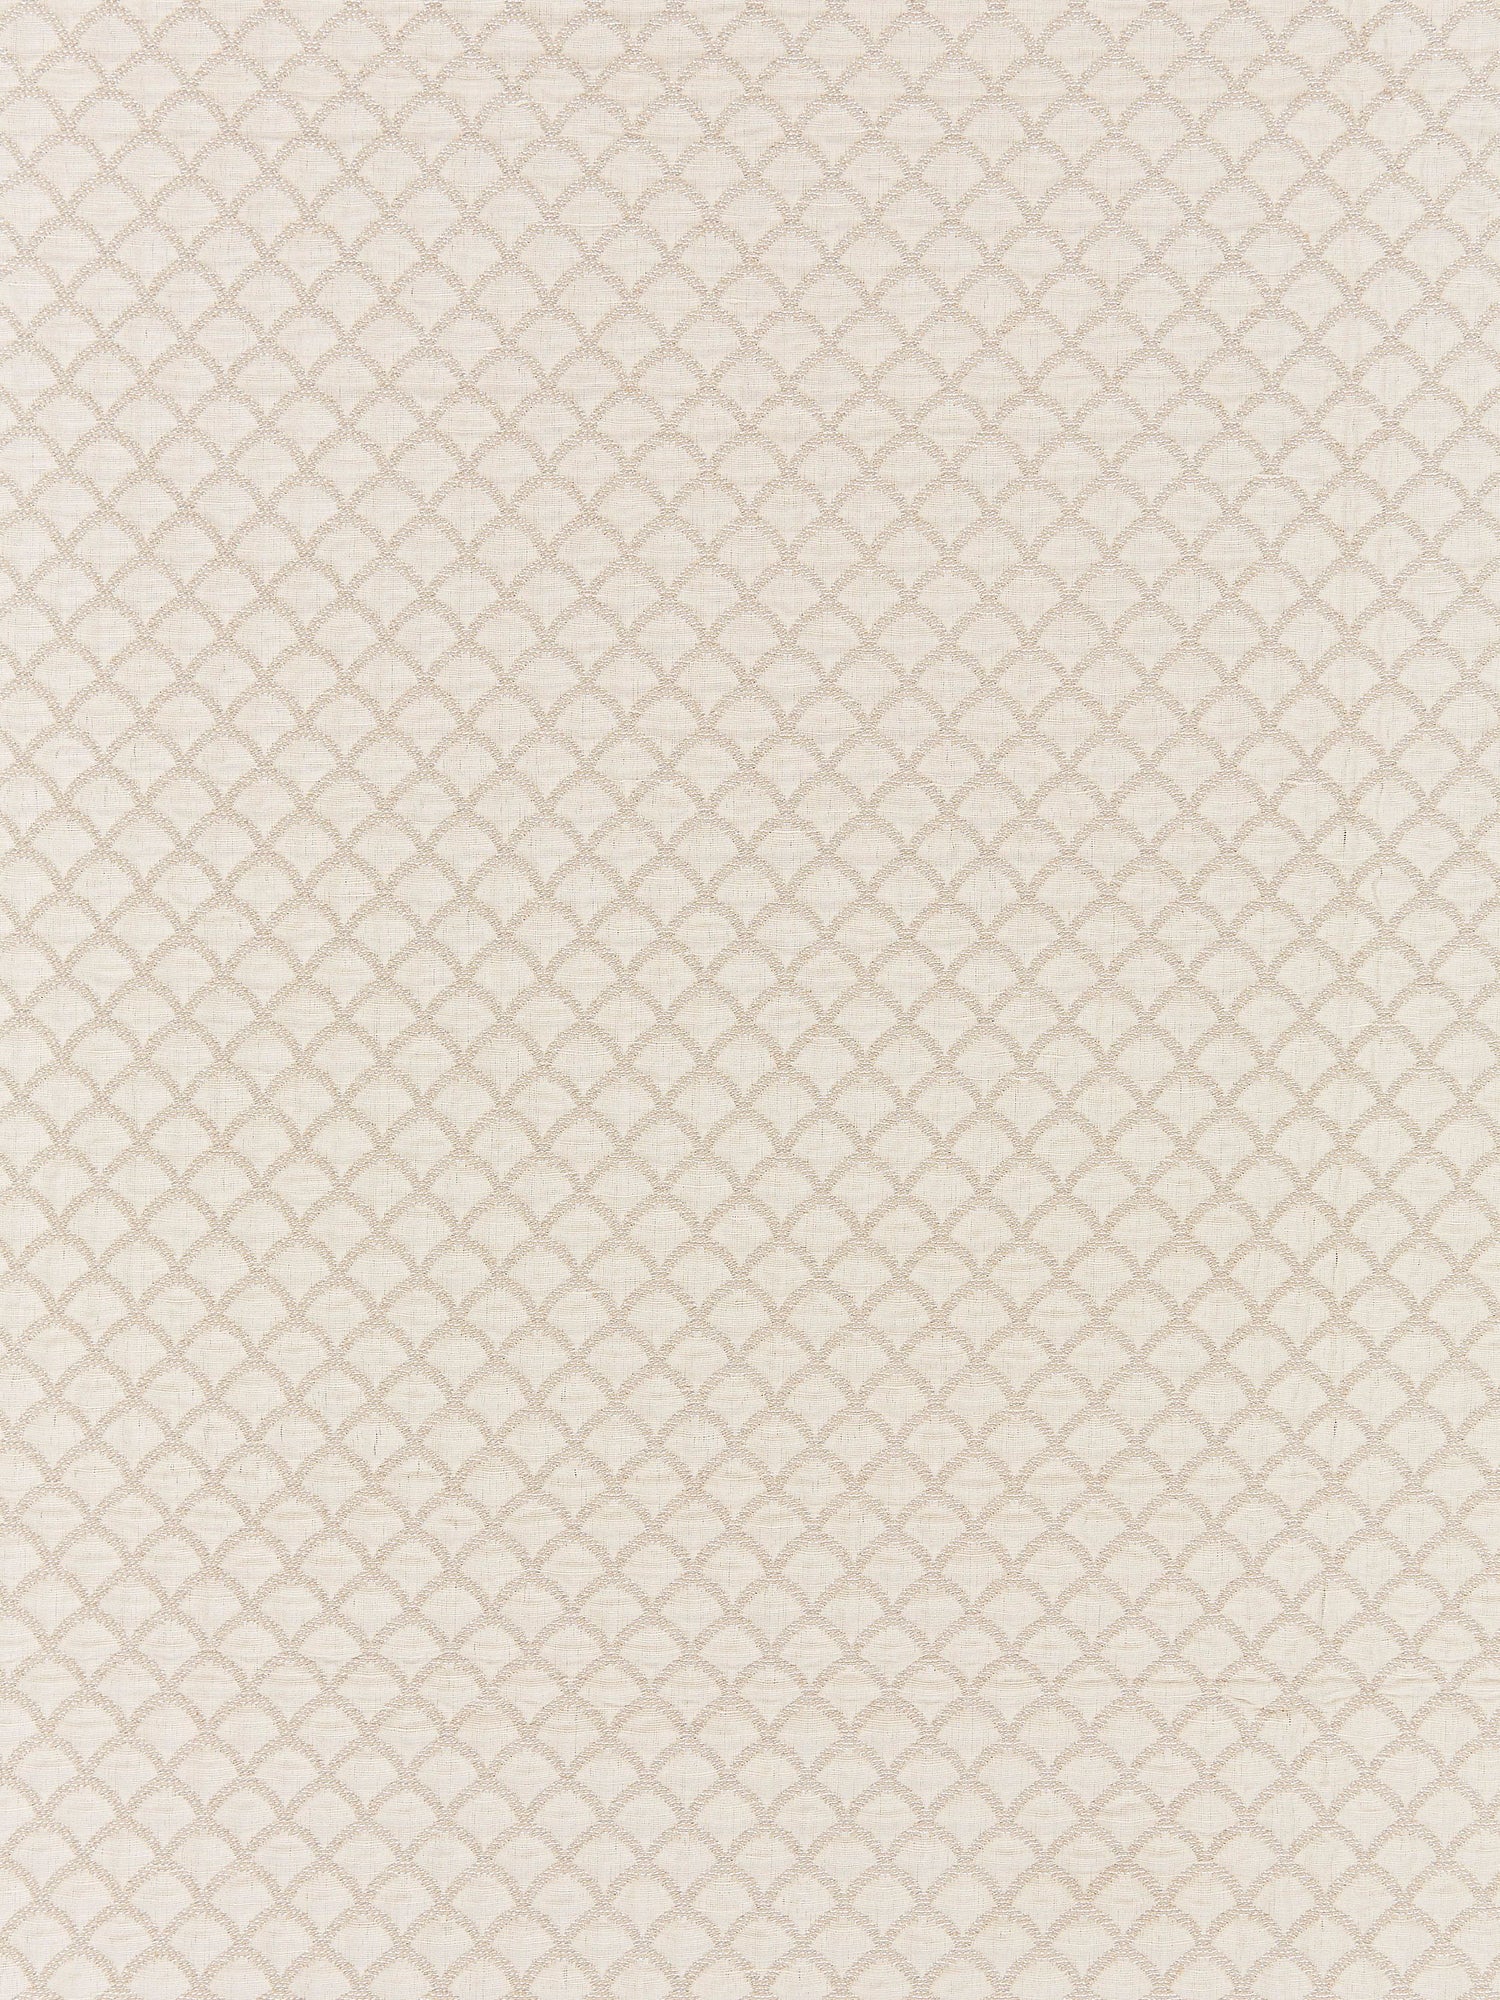 Scallop Weave fabric in oyster color - pattern number SC 000127137 - by Scalamandre in the Scalamandre Fabrics Book 1 collection